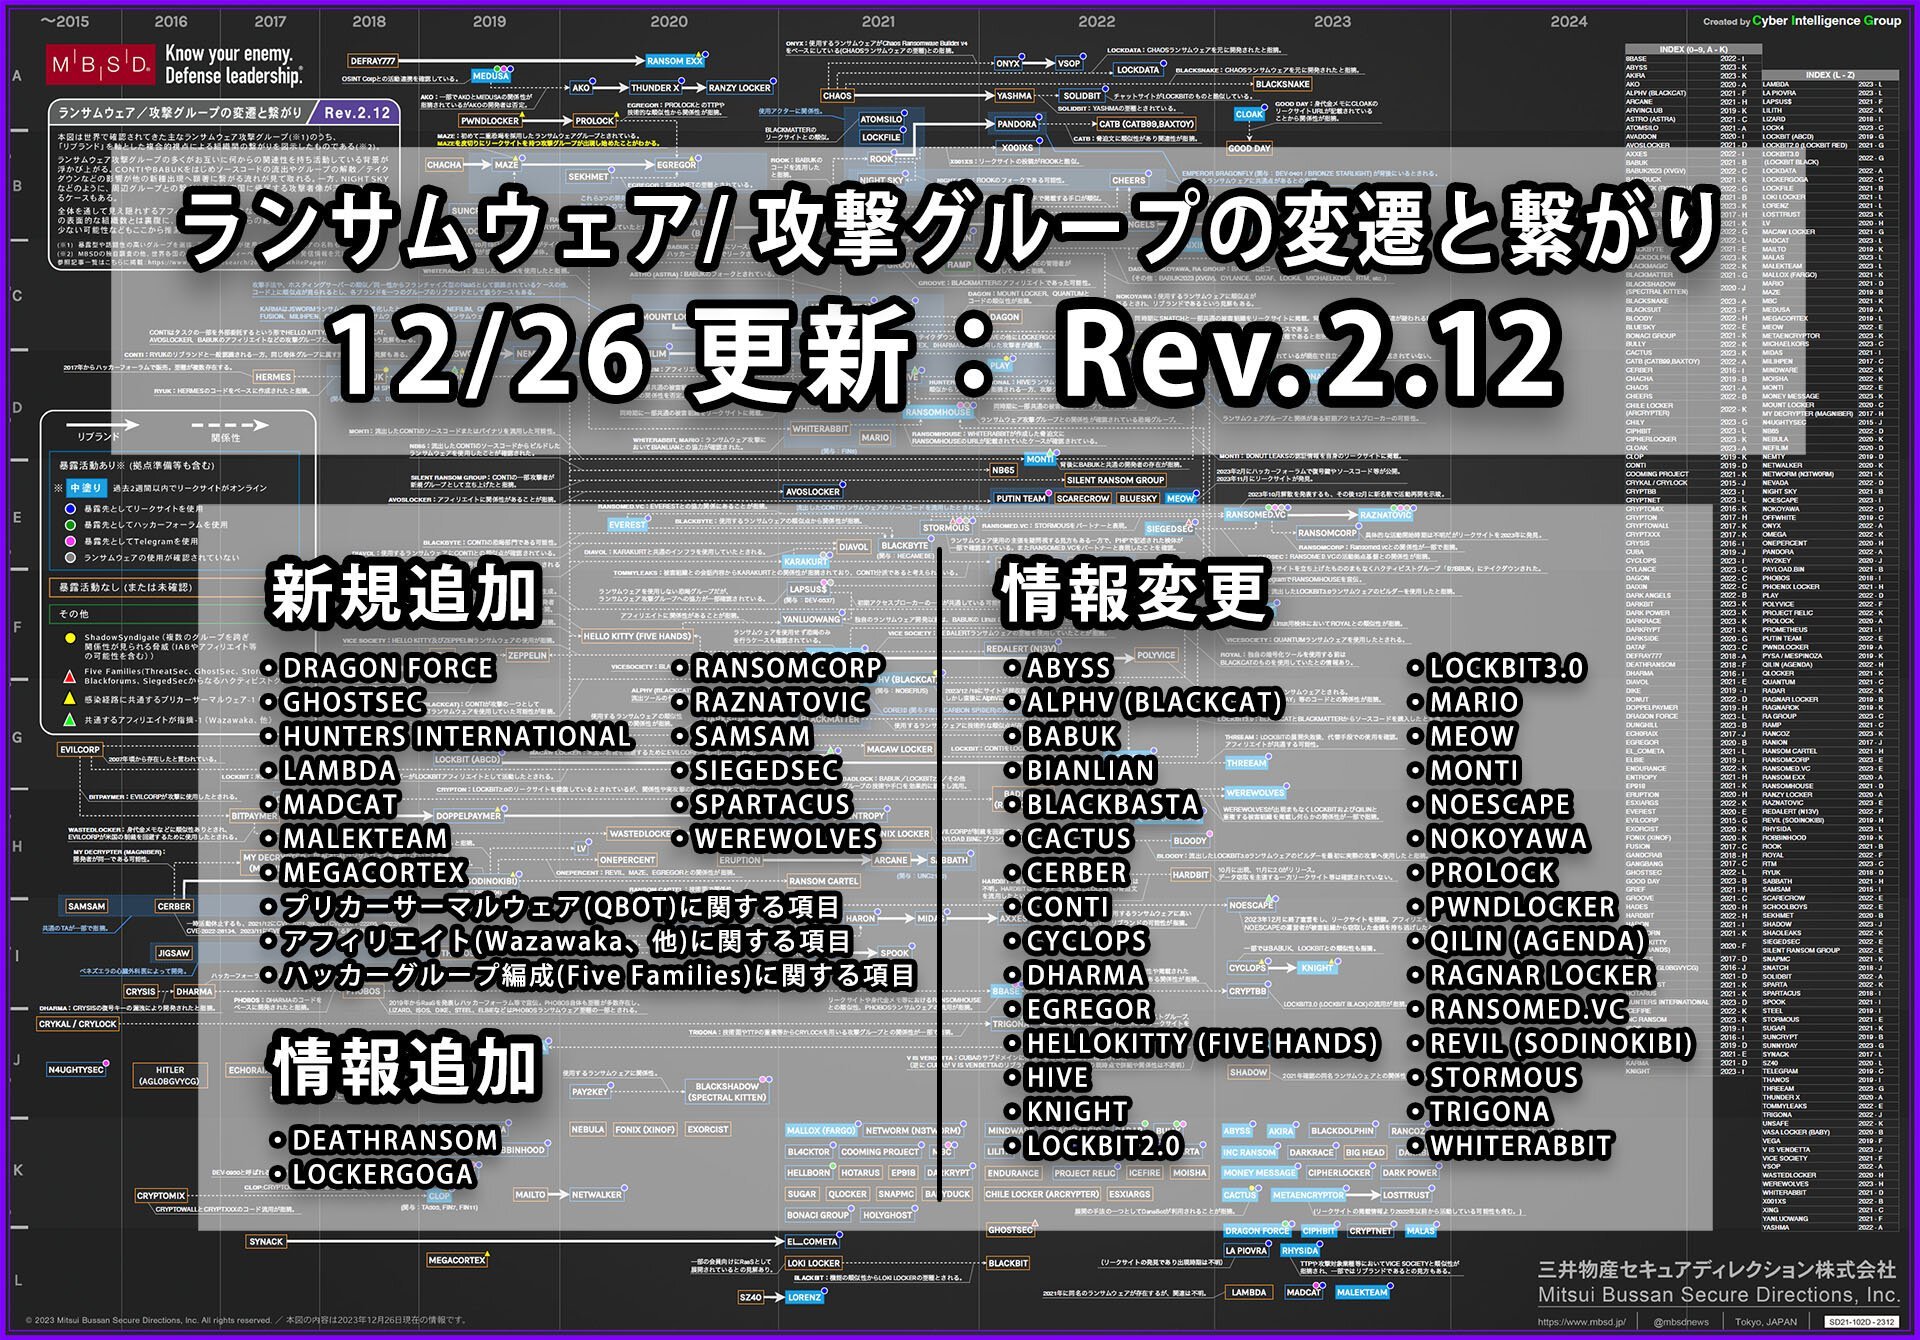 Thumb_MBSD_History_of_ransomware_group_connections_and_transitions_JPN_Rev.2.12.jpg